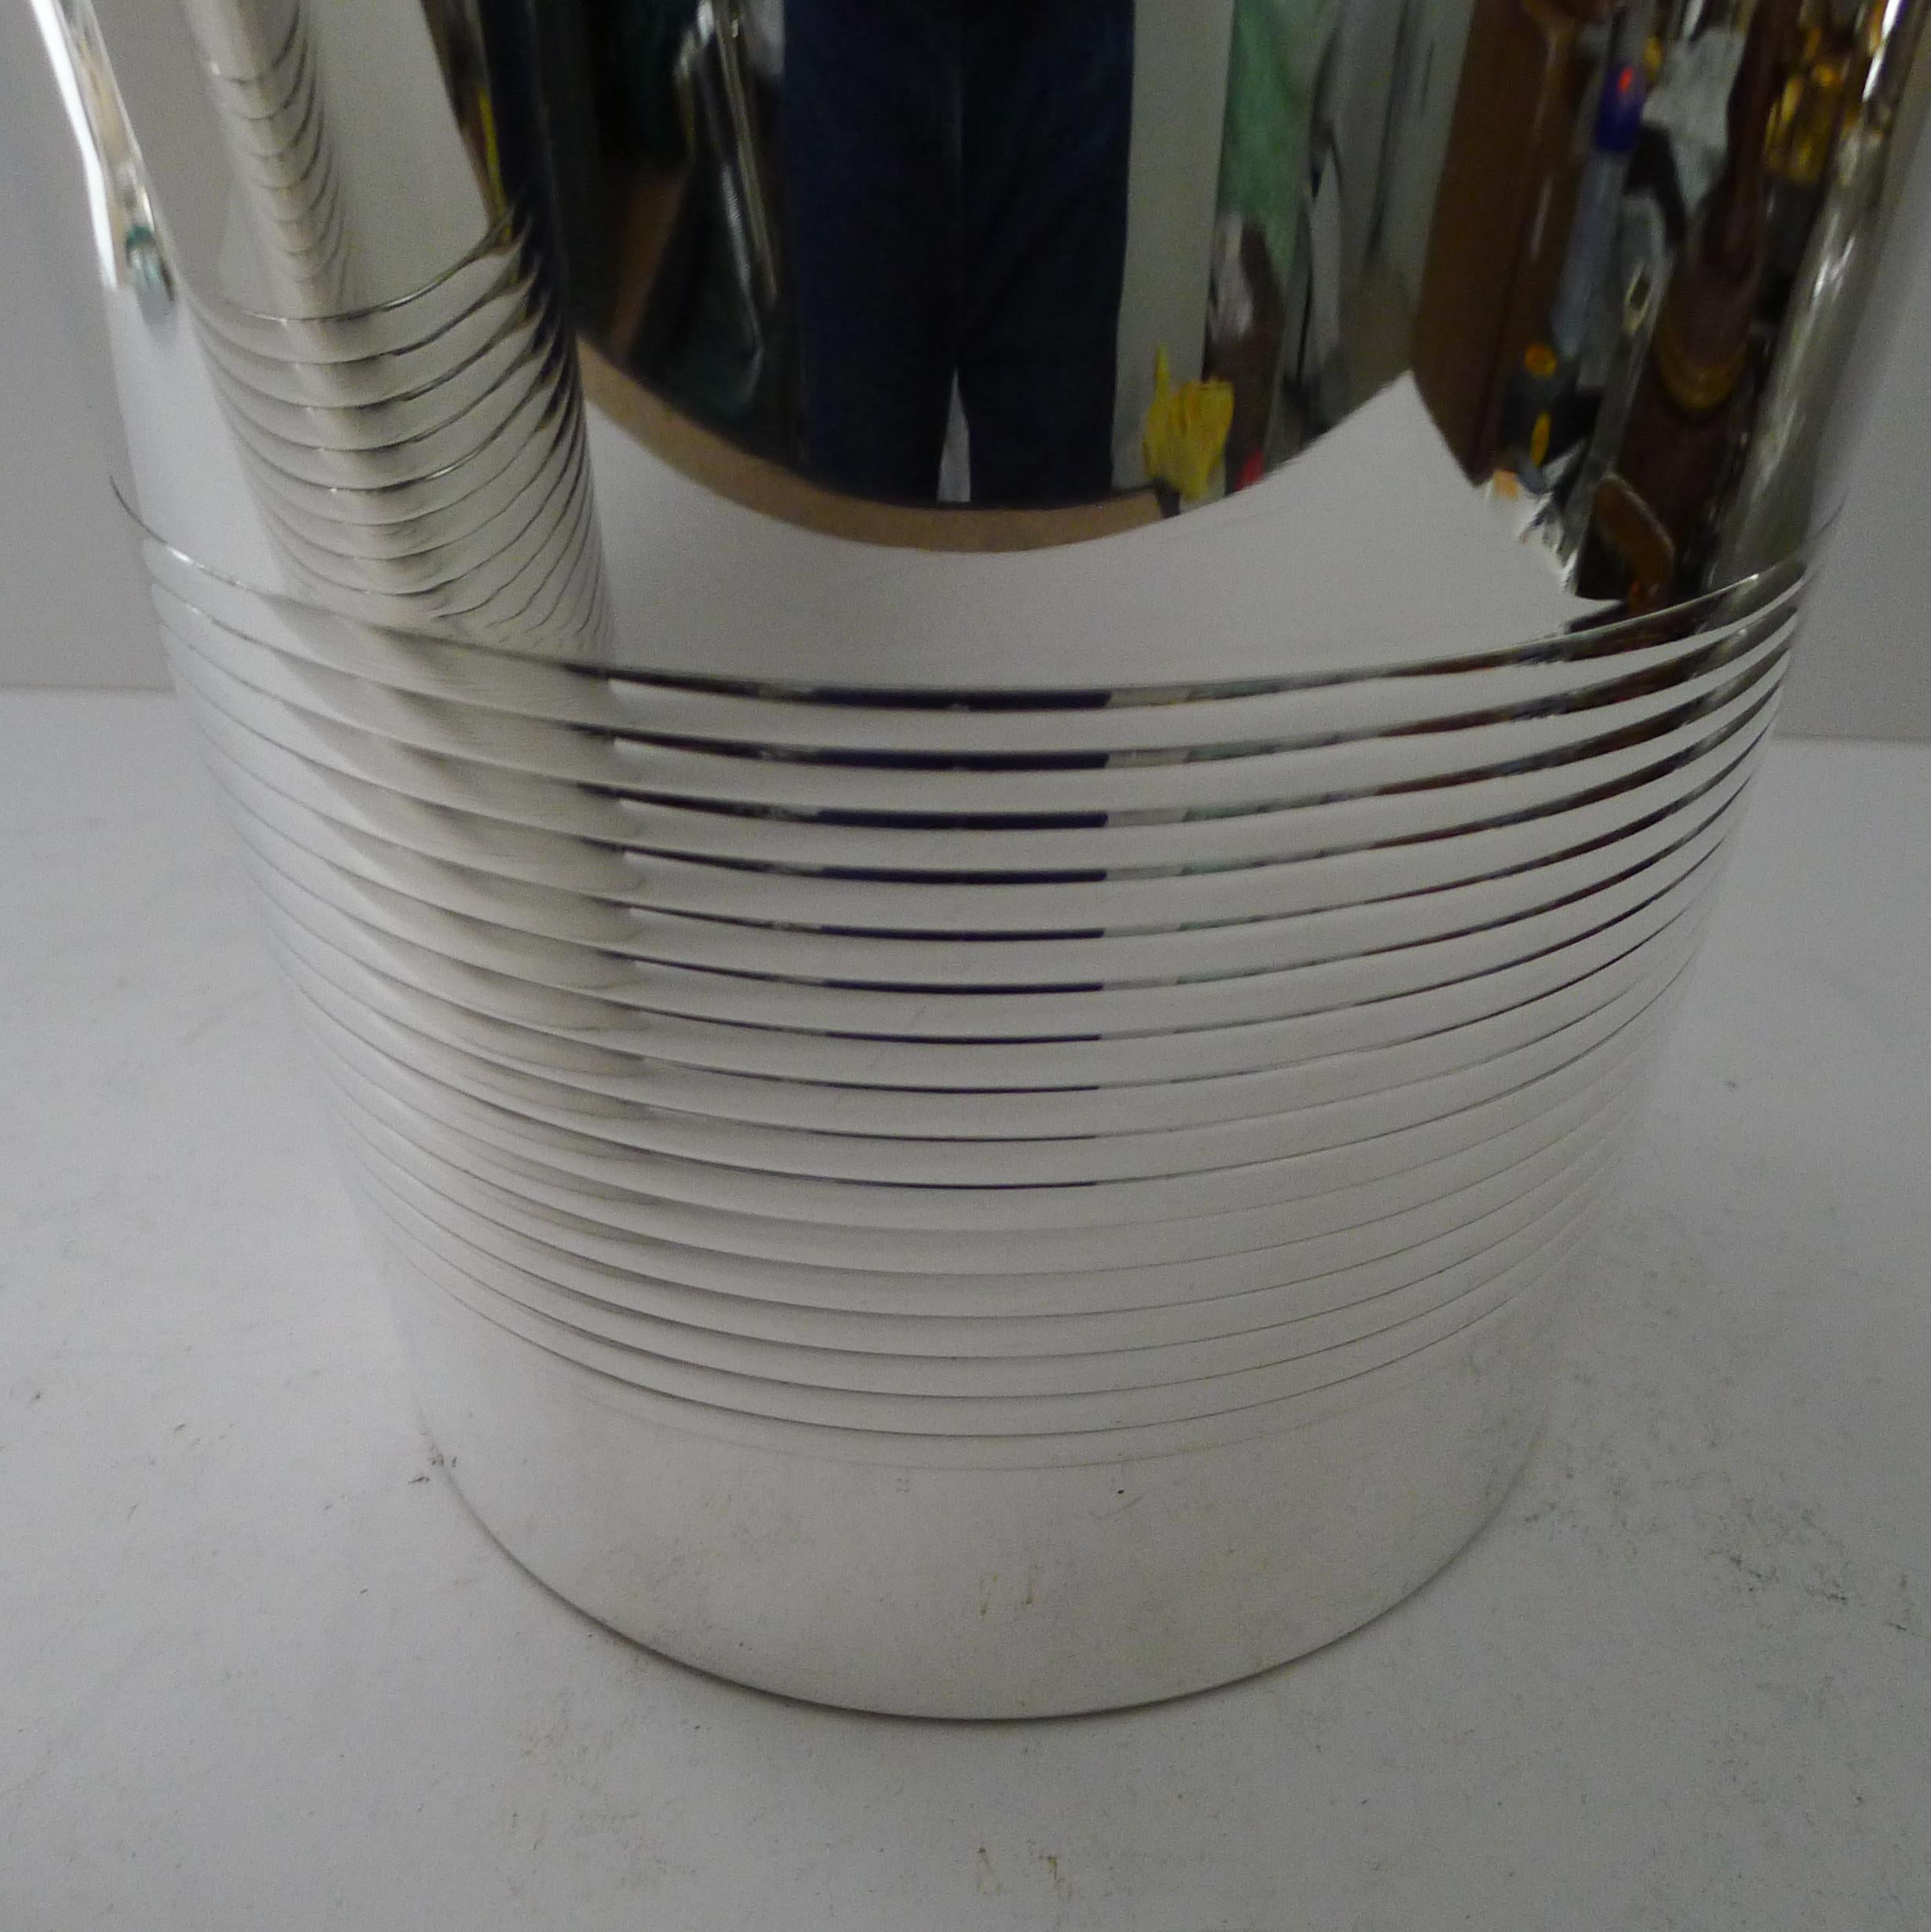 Luc Lanel for Christofle - Pair Champagne Buckets / Wine Coolers - Vulcan c.1940 For Sale 3